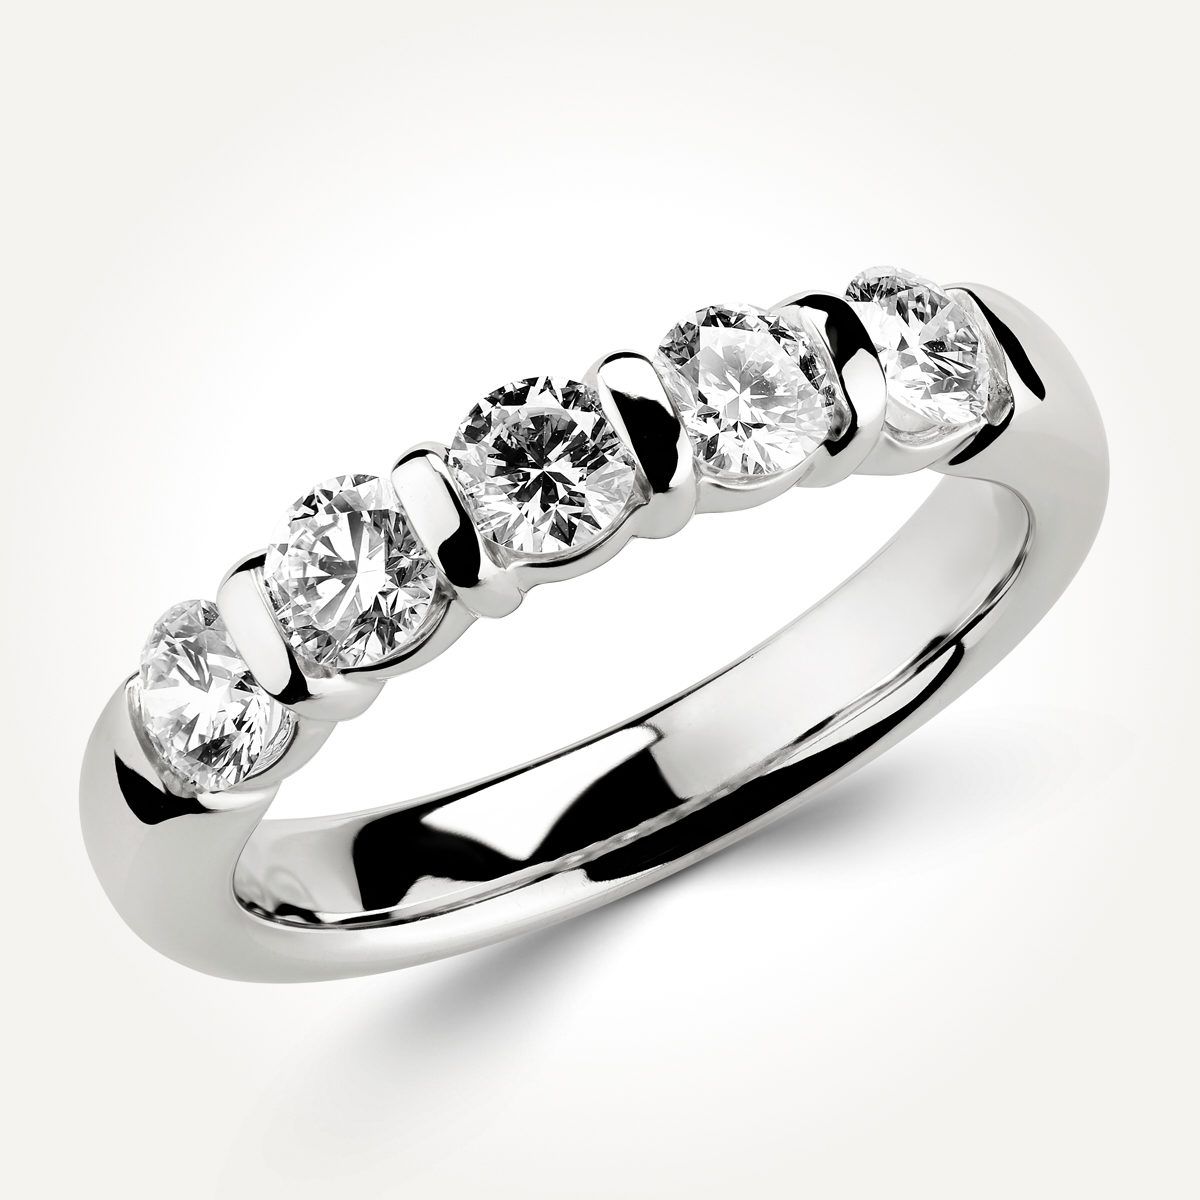 14KT White Gold Five Stone Ring